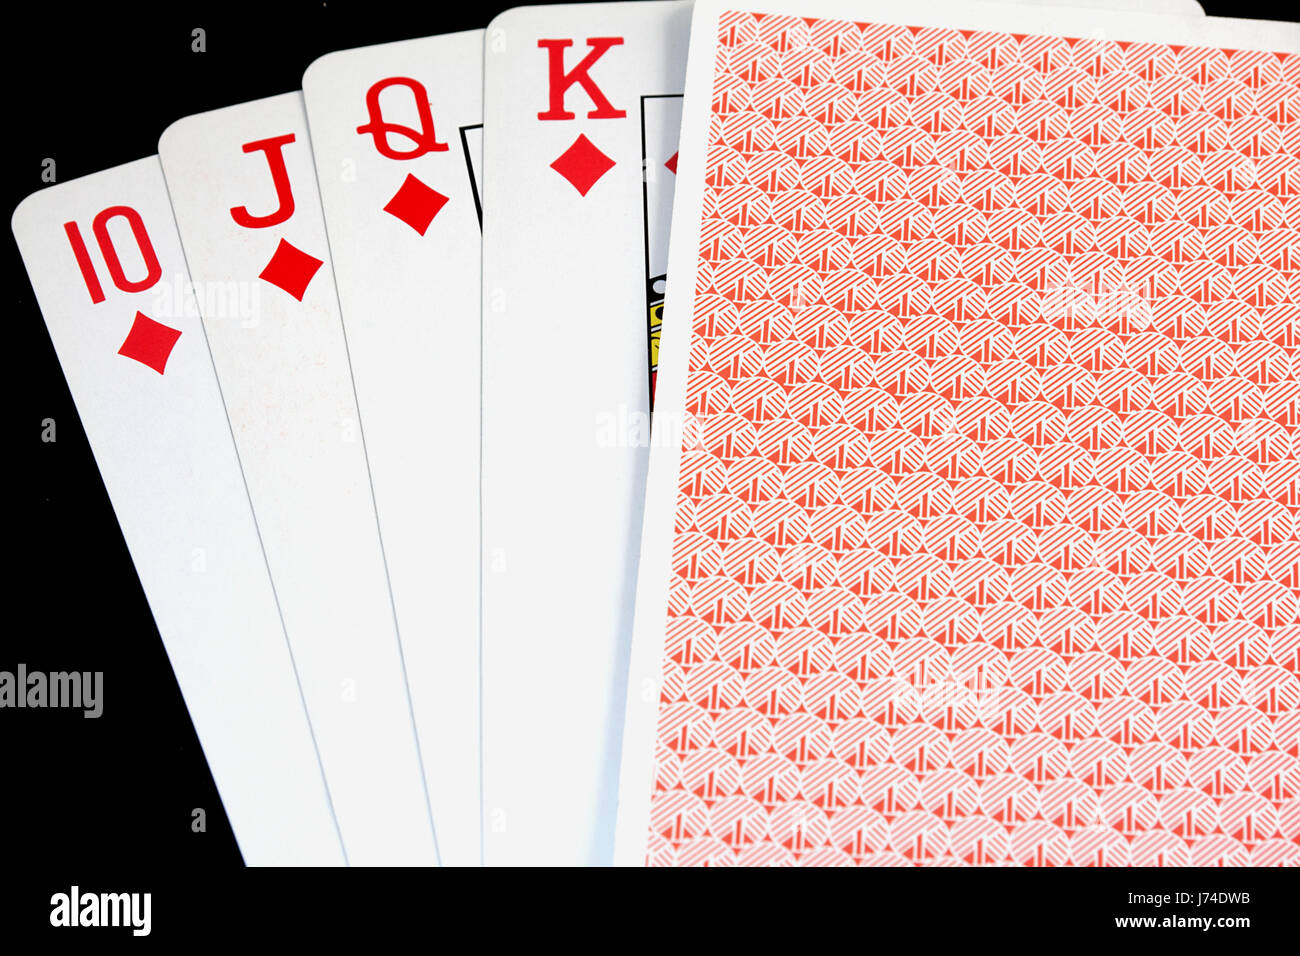 card flush cast diamonds hand give royal cards spare time free time leisure Stock Photo